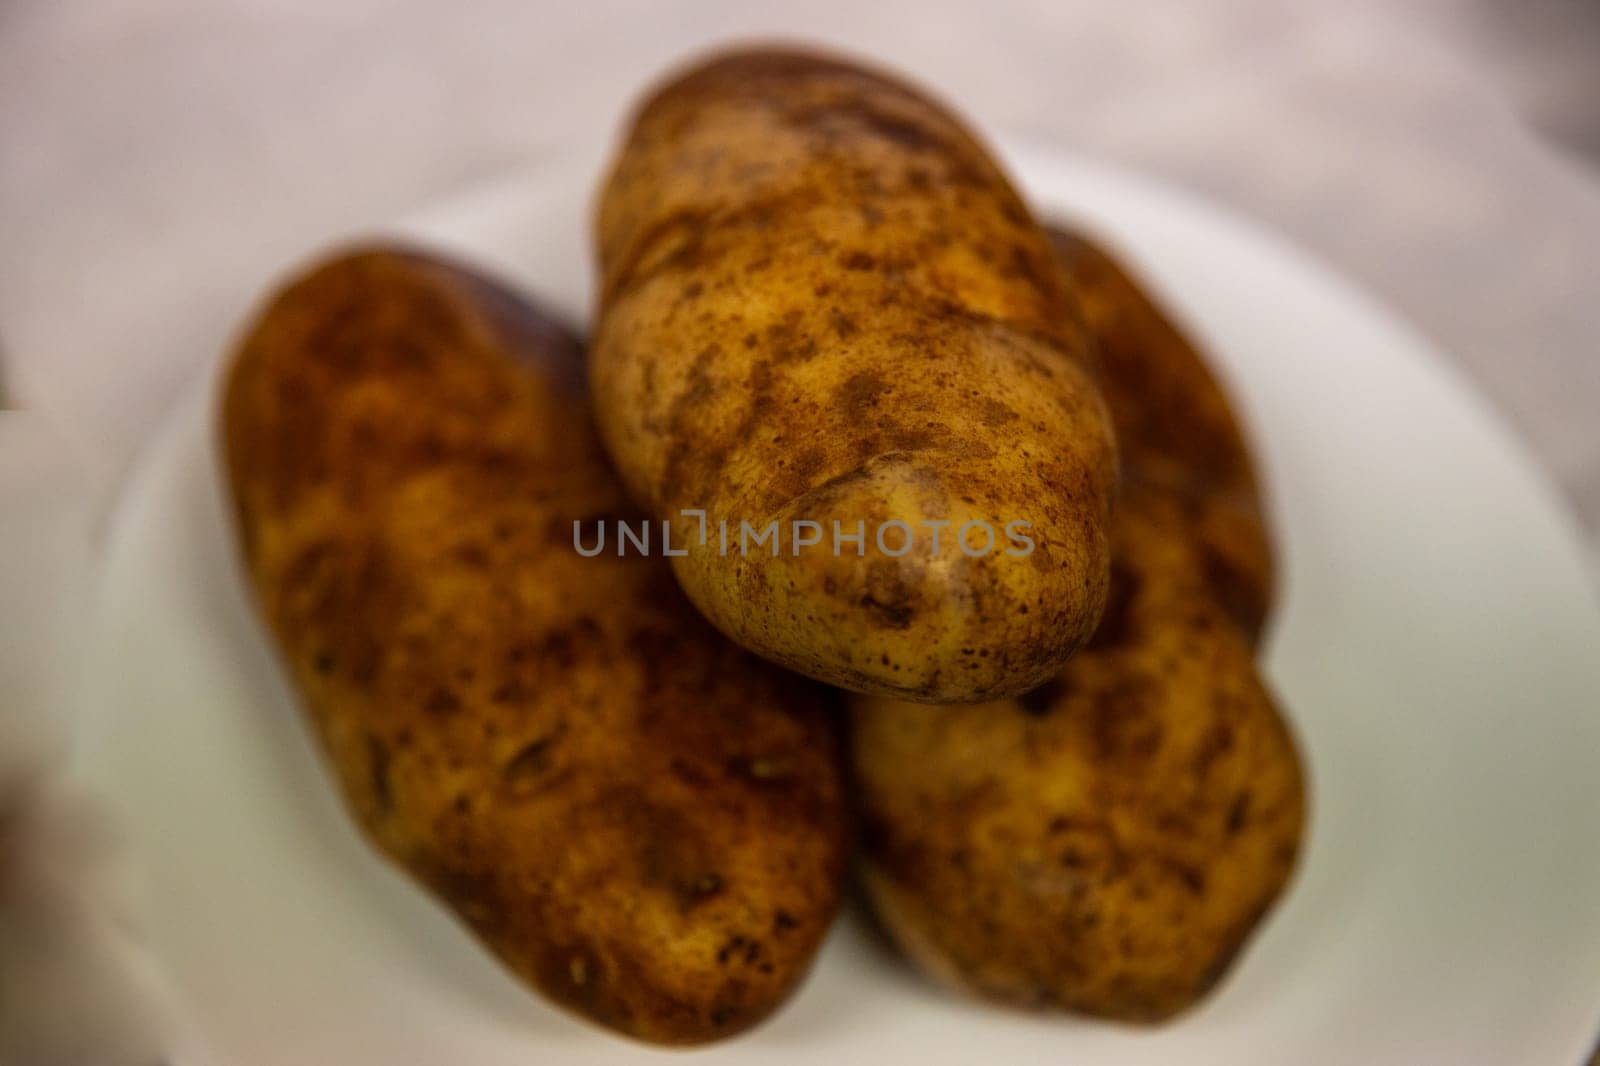 Three Russet Potatoes by TopCreativePhotography